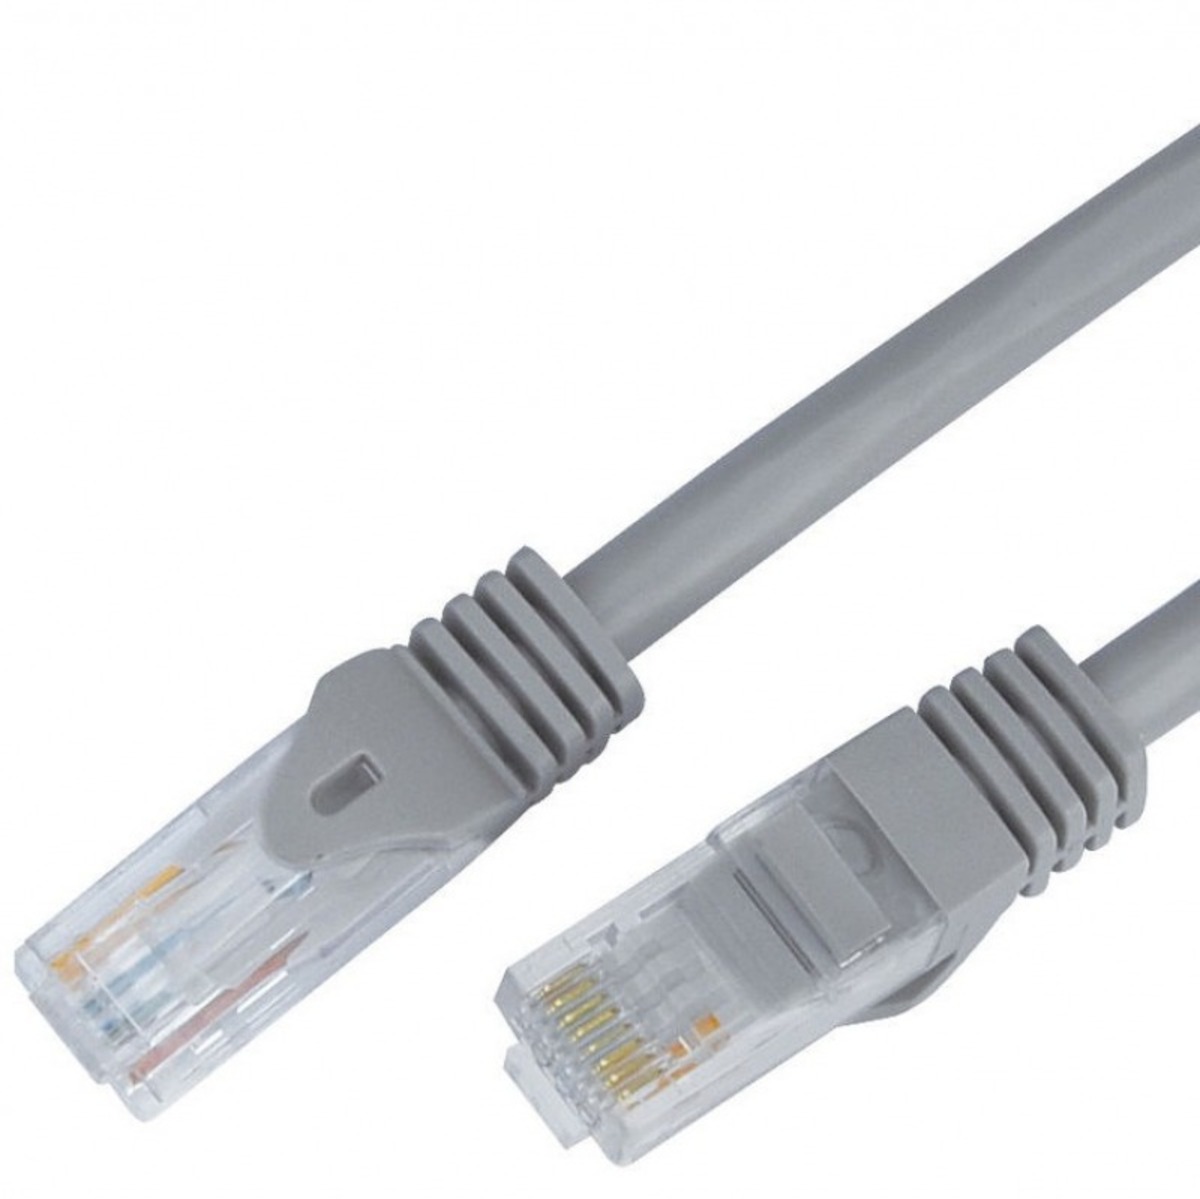 Iends Cat 6 Patch Cord Network Cable Ethernet Patch Cord Cable Grey 3 Meter CA8115